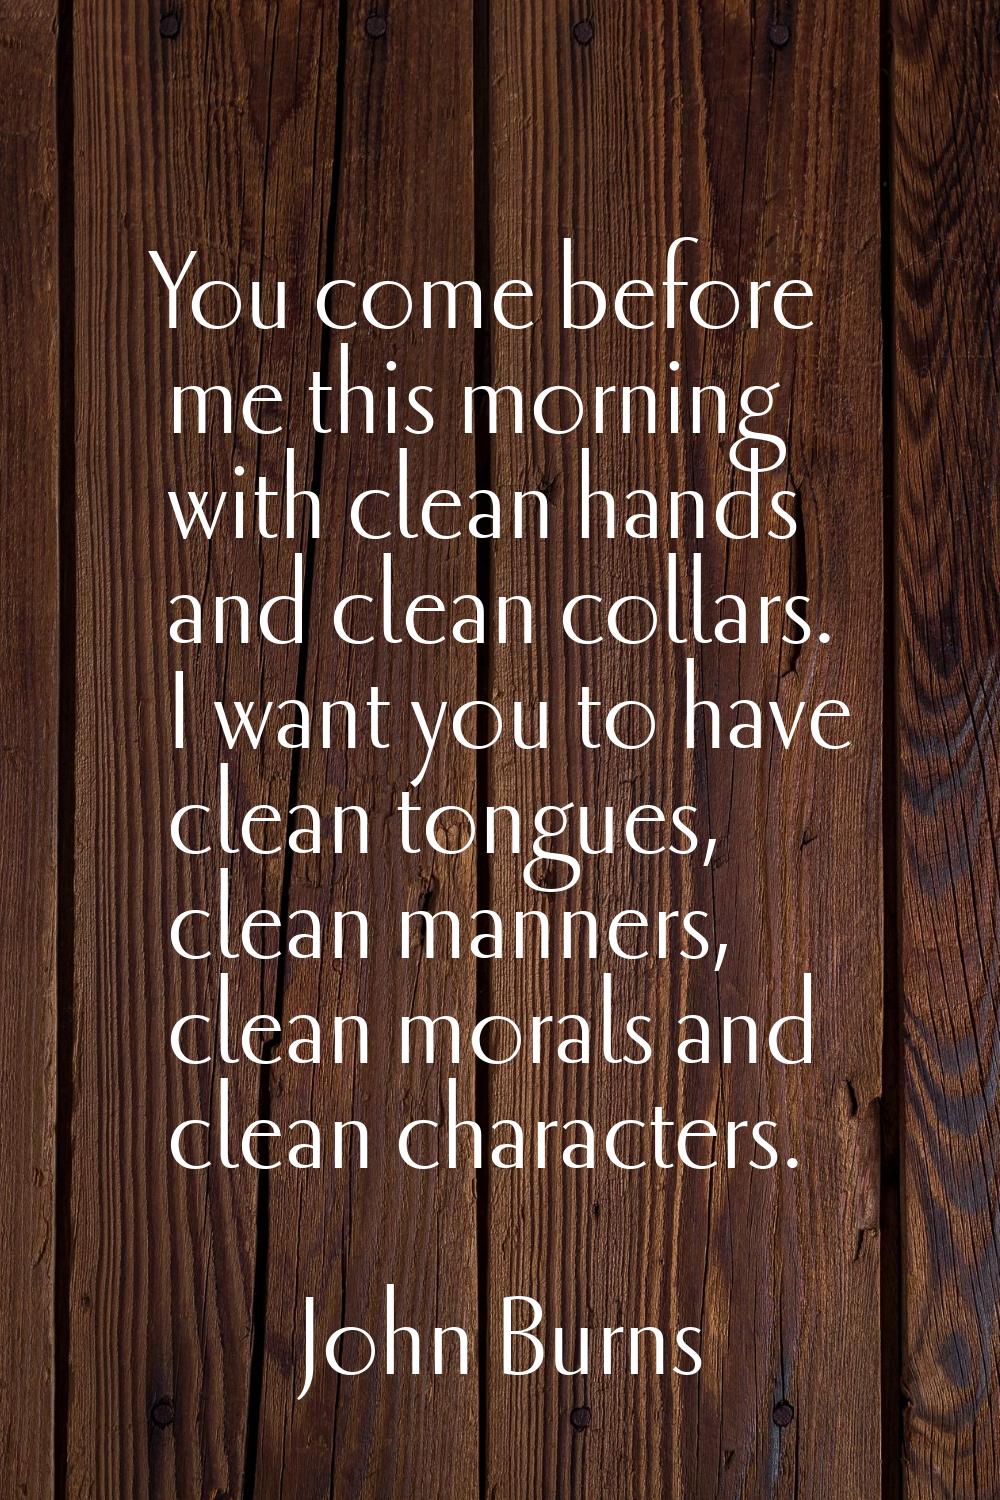 You come before me this morning with clean hands and clean collars. I want you to have clean tongue